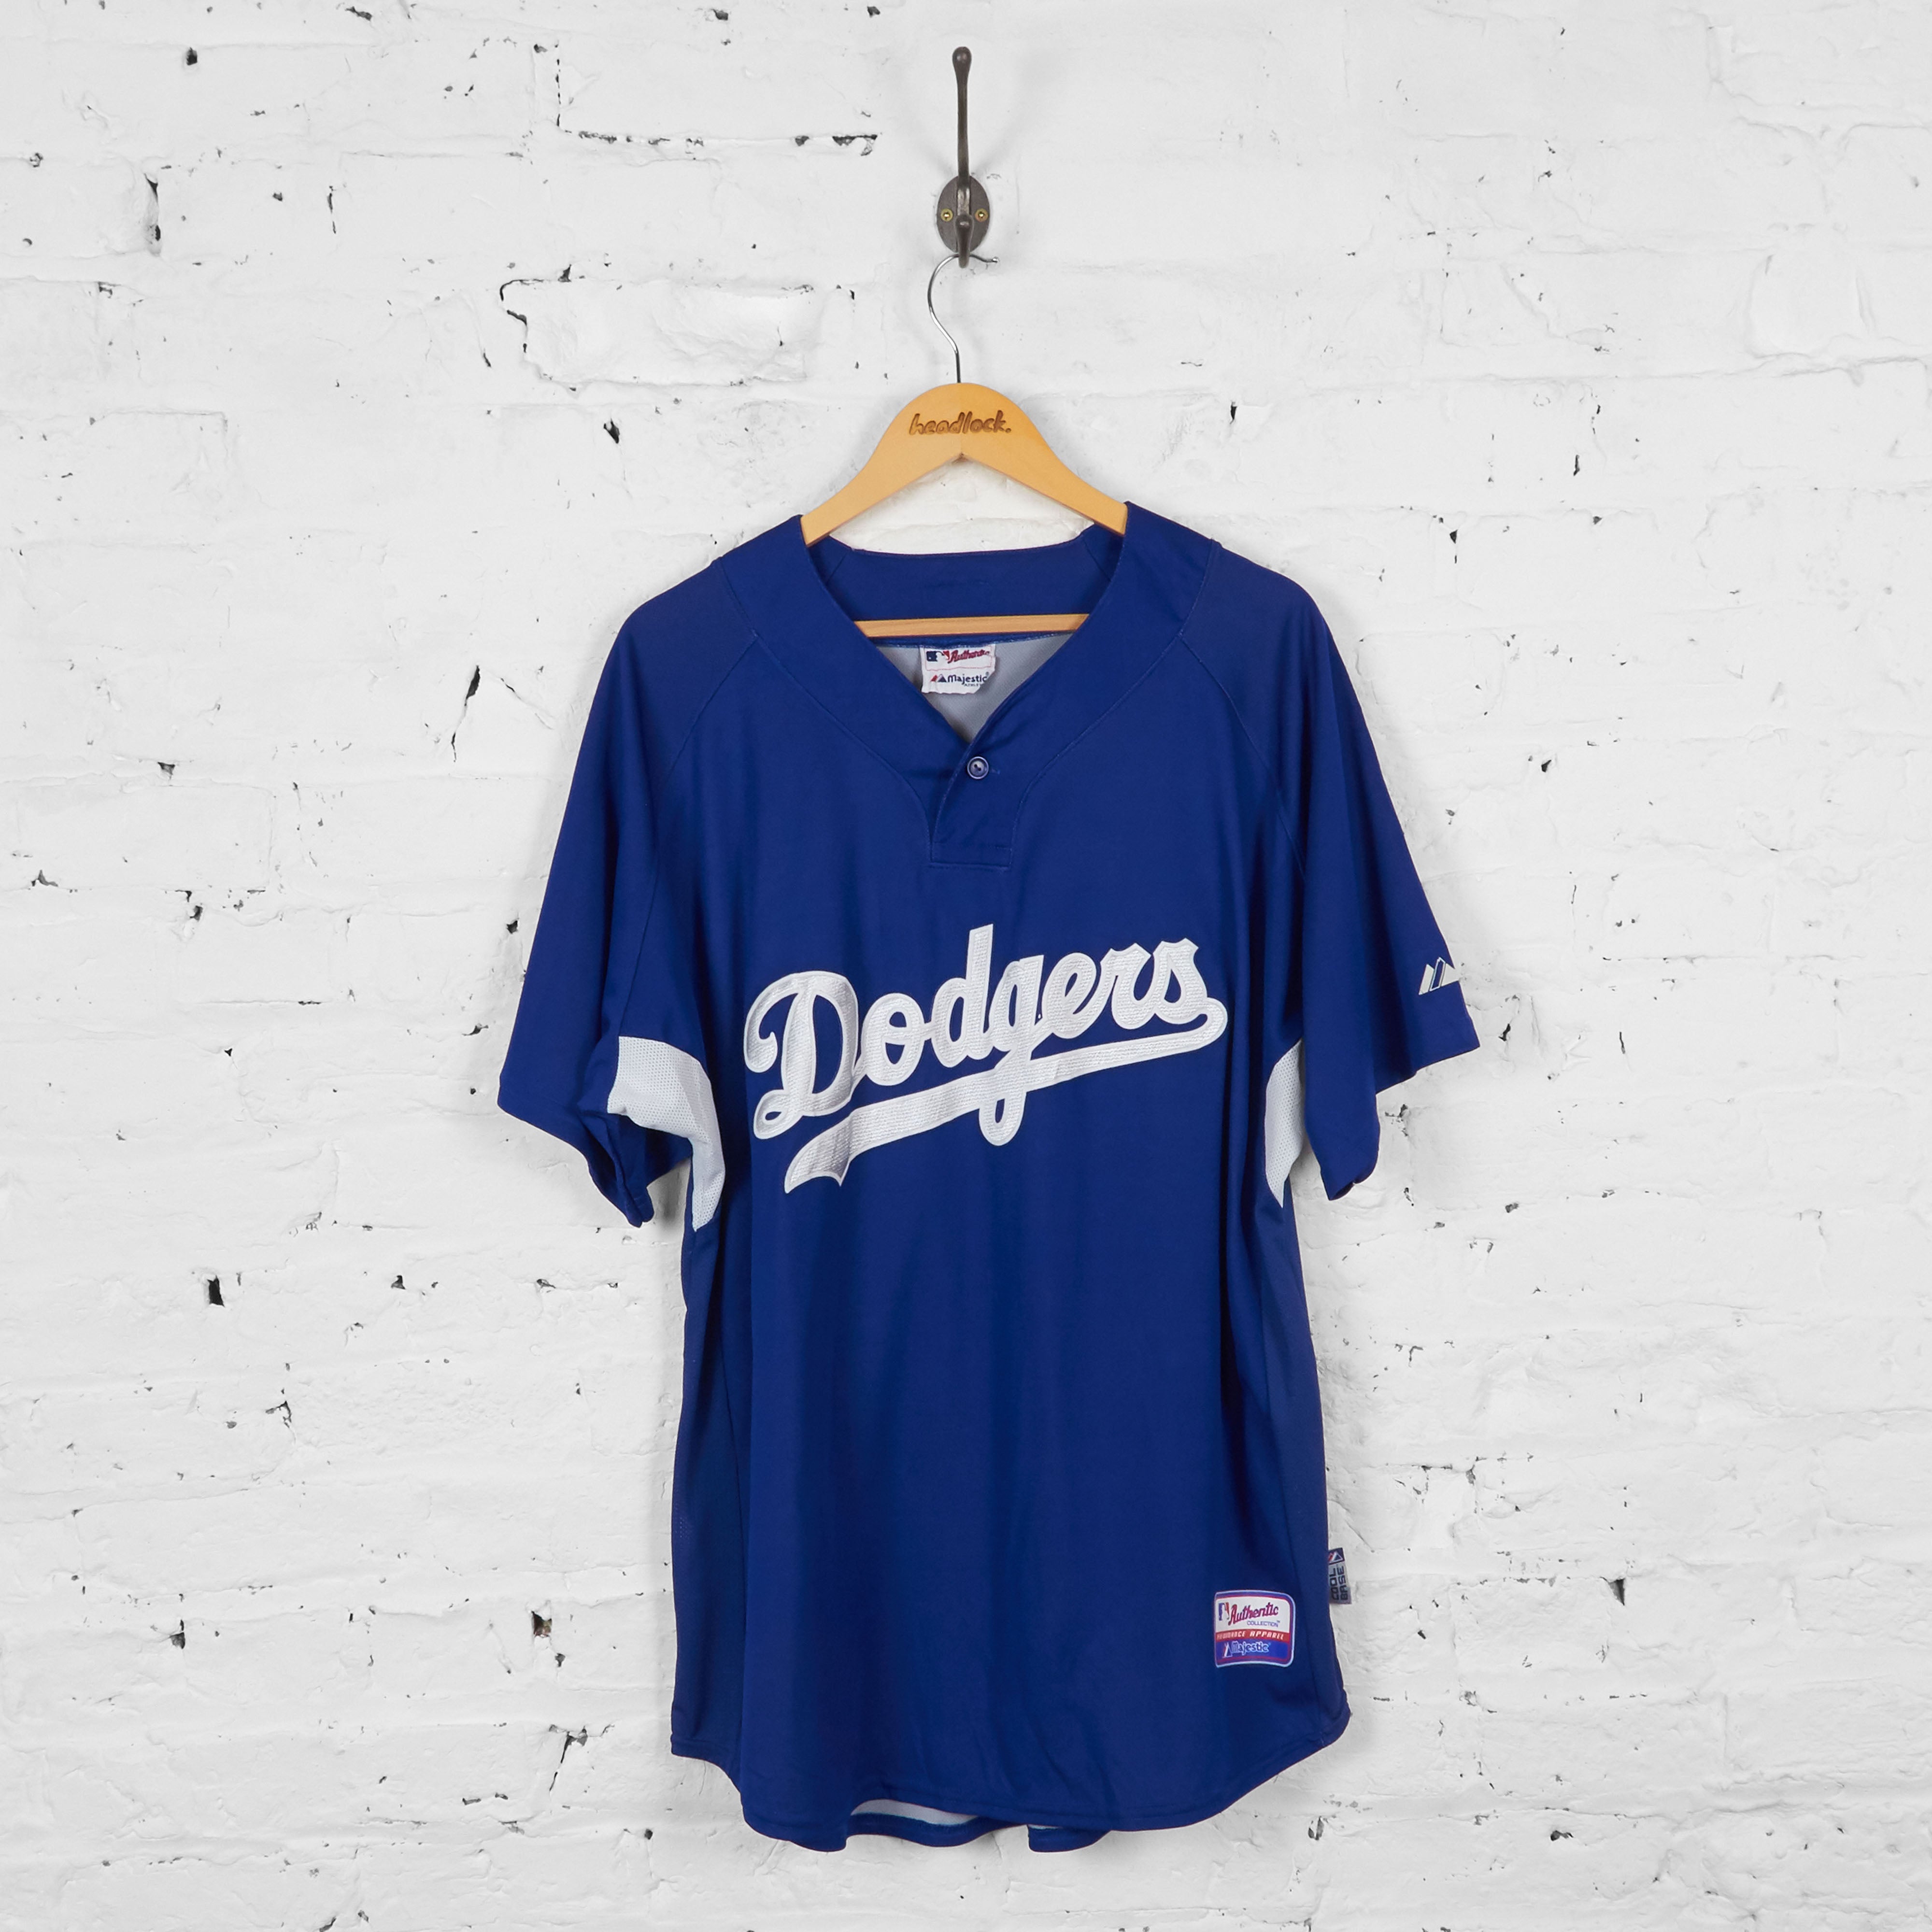 Los Angeles DODGERS MLB Majestic royal blue Home Jersey